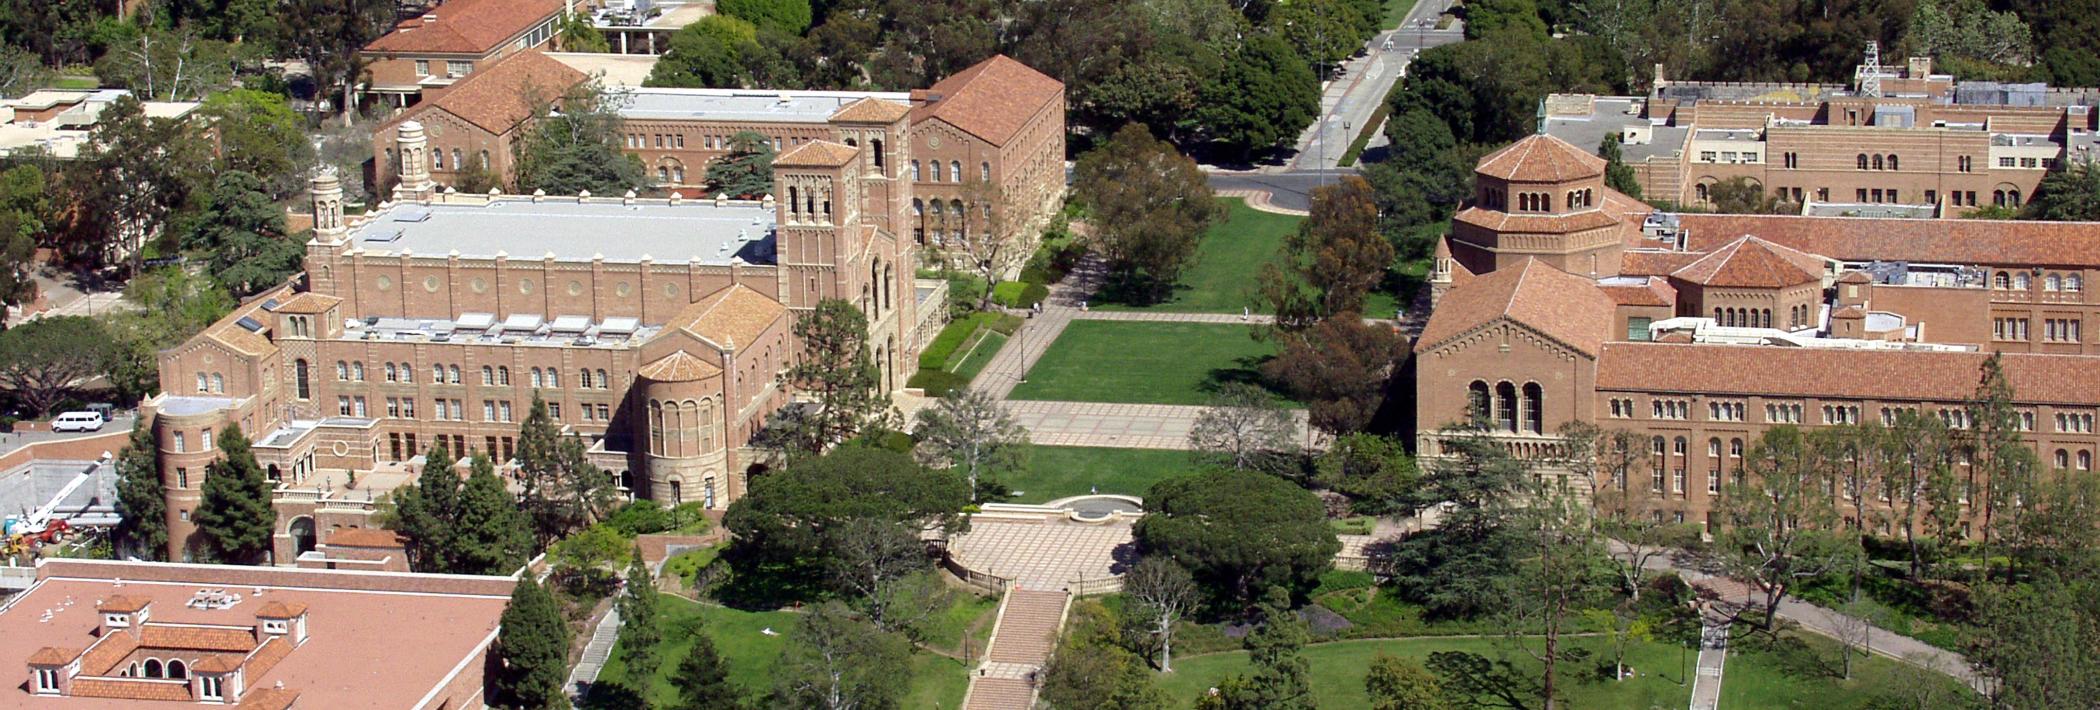 Aerial view of central UCLA campus.